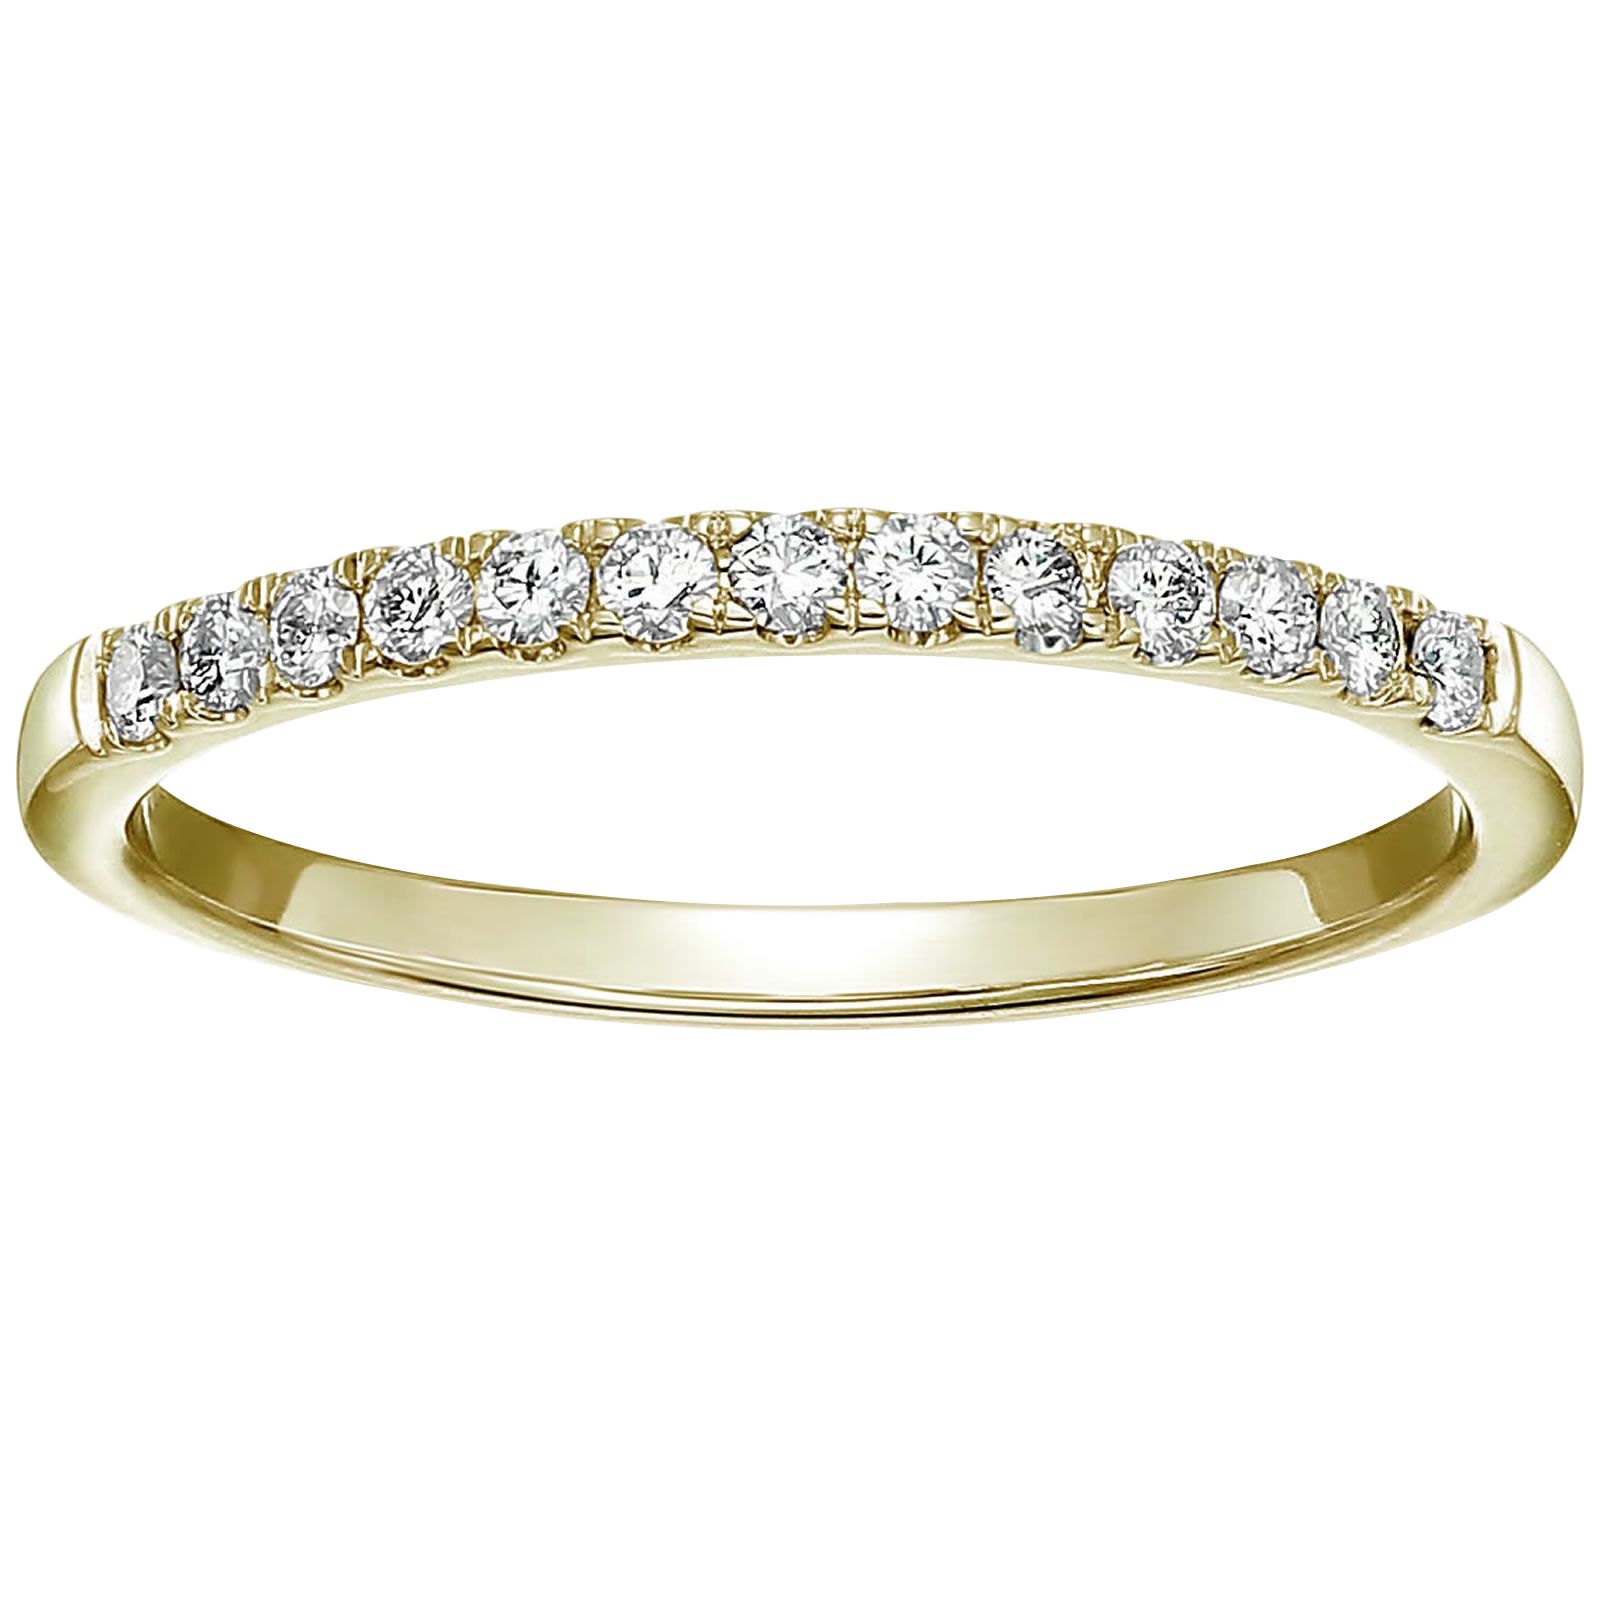 Amairah 0.20 ct. t.w. Pave Diamond Wedding Band in 14K Yellow Gold, Size 4.5